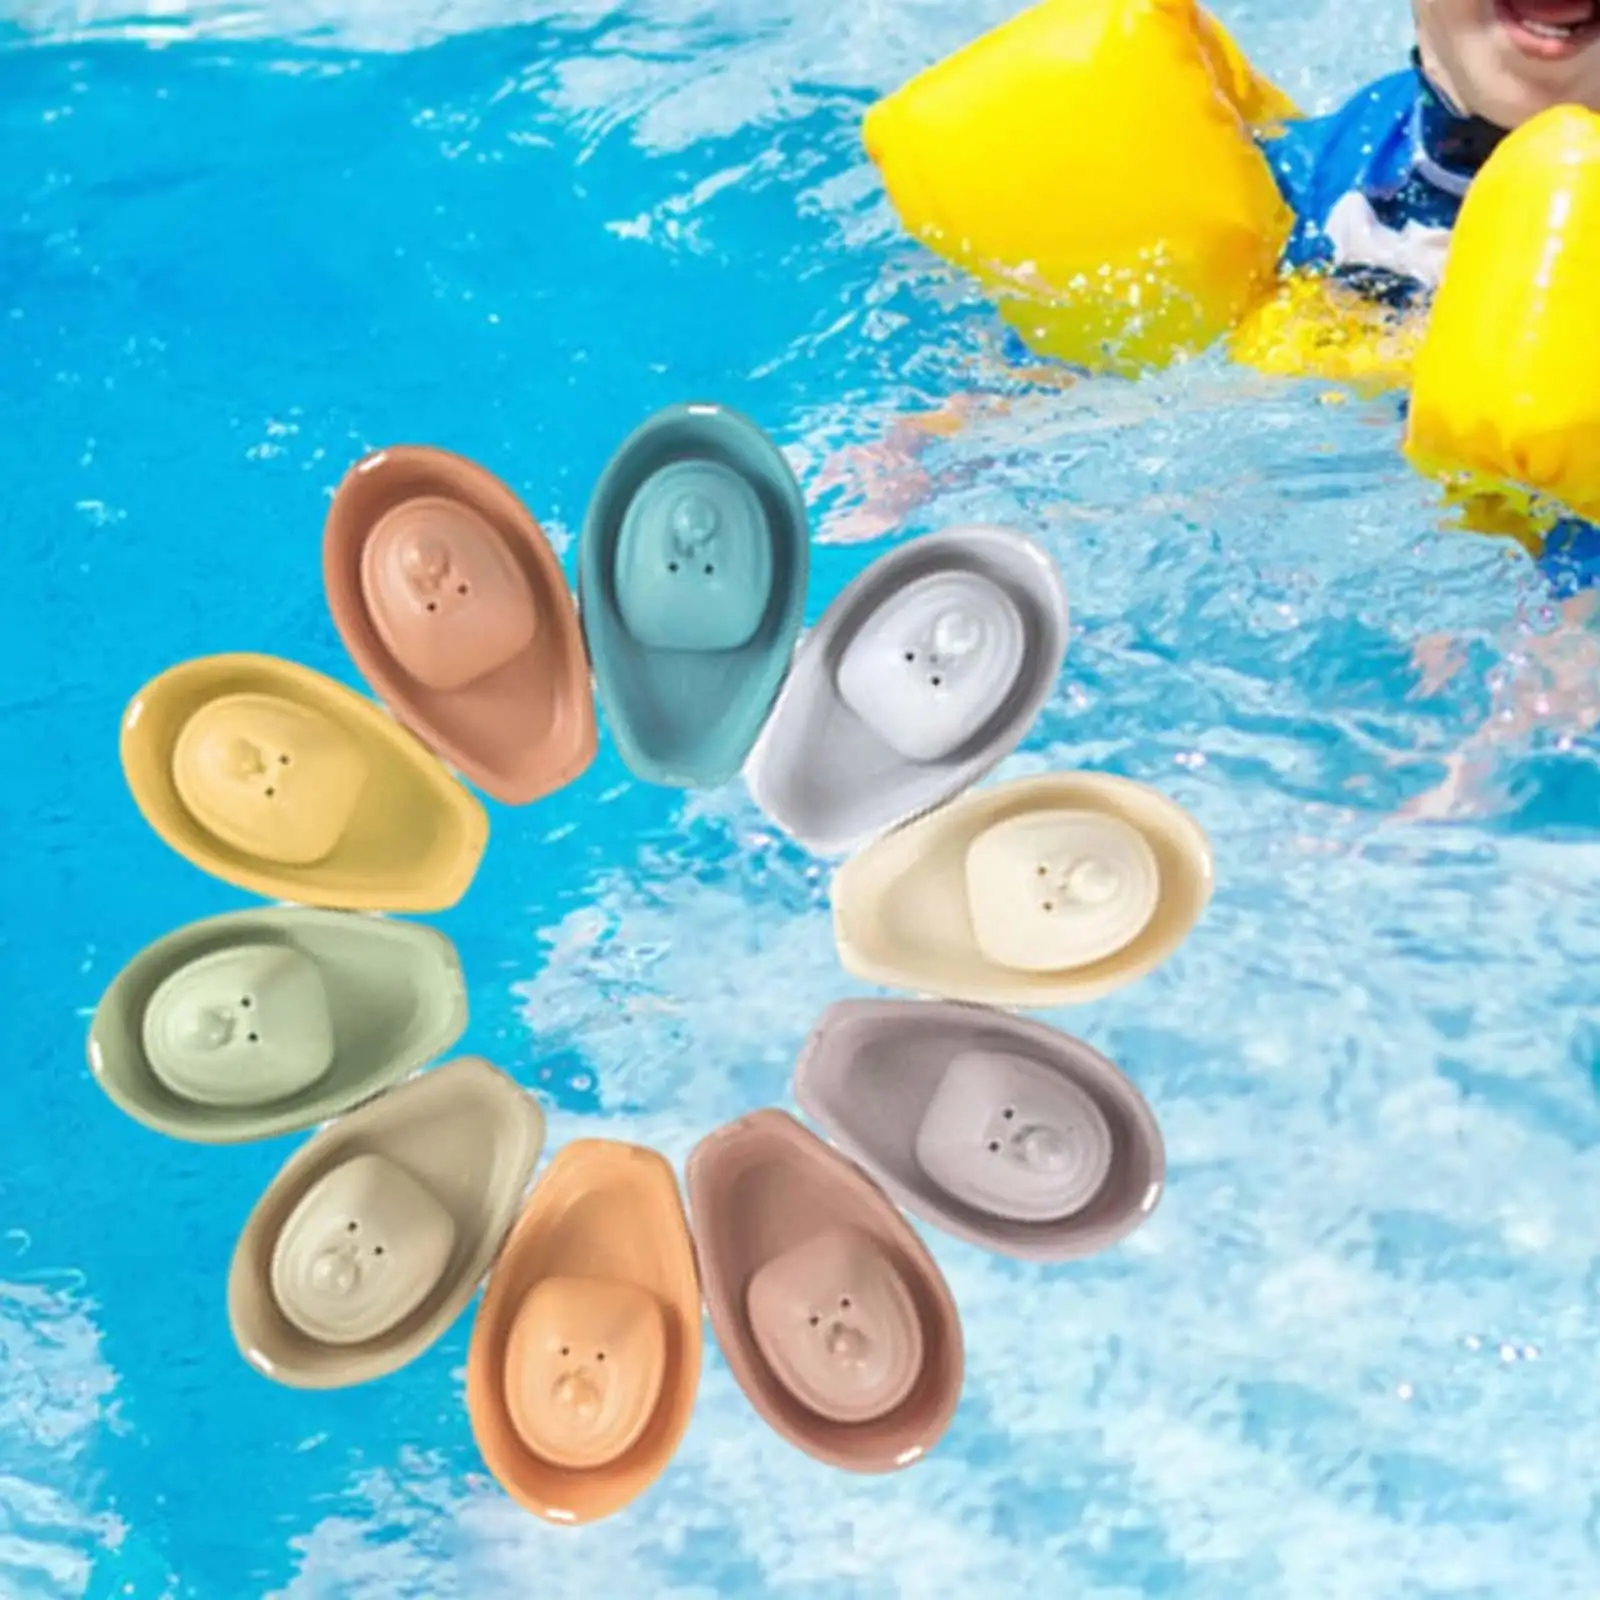 10 Pieces Baby Bath Stacking Boat Toy Educational for Babies Party Toy